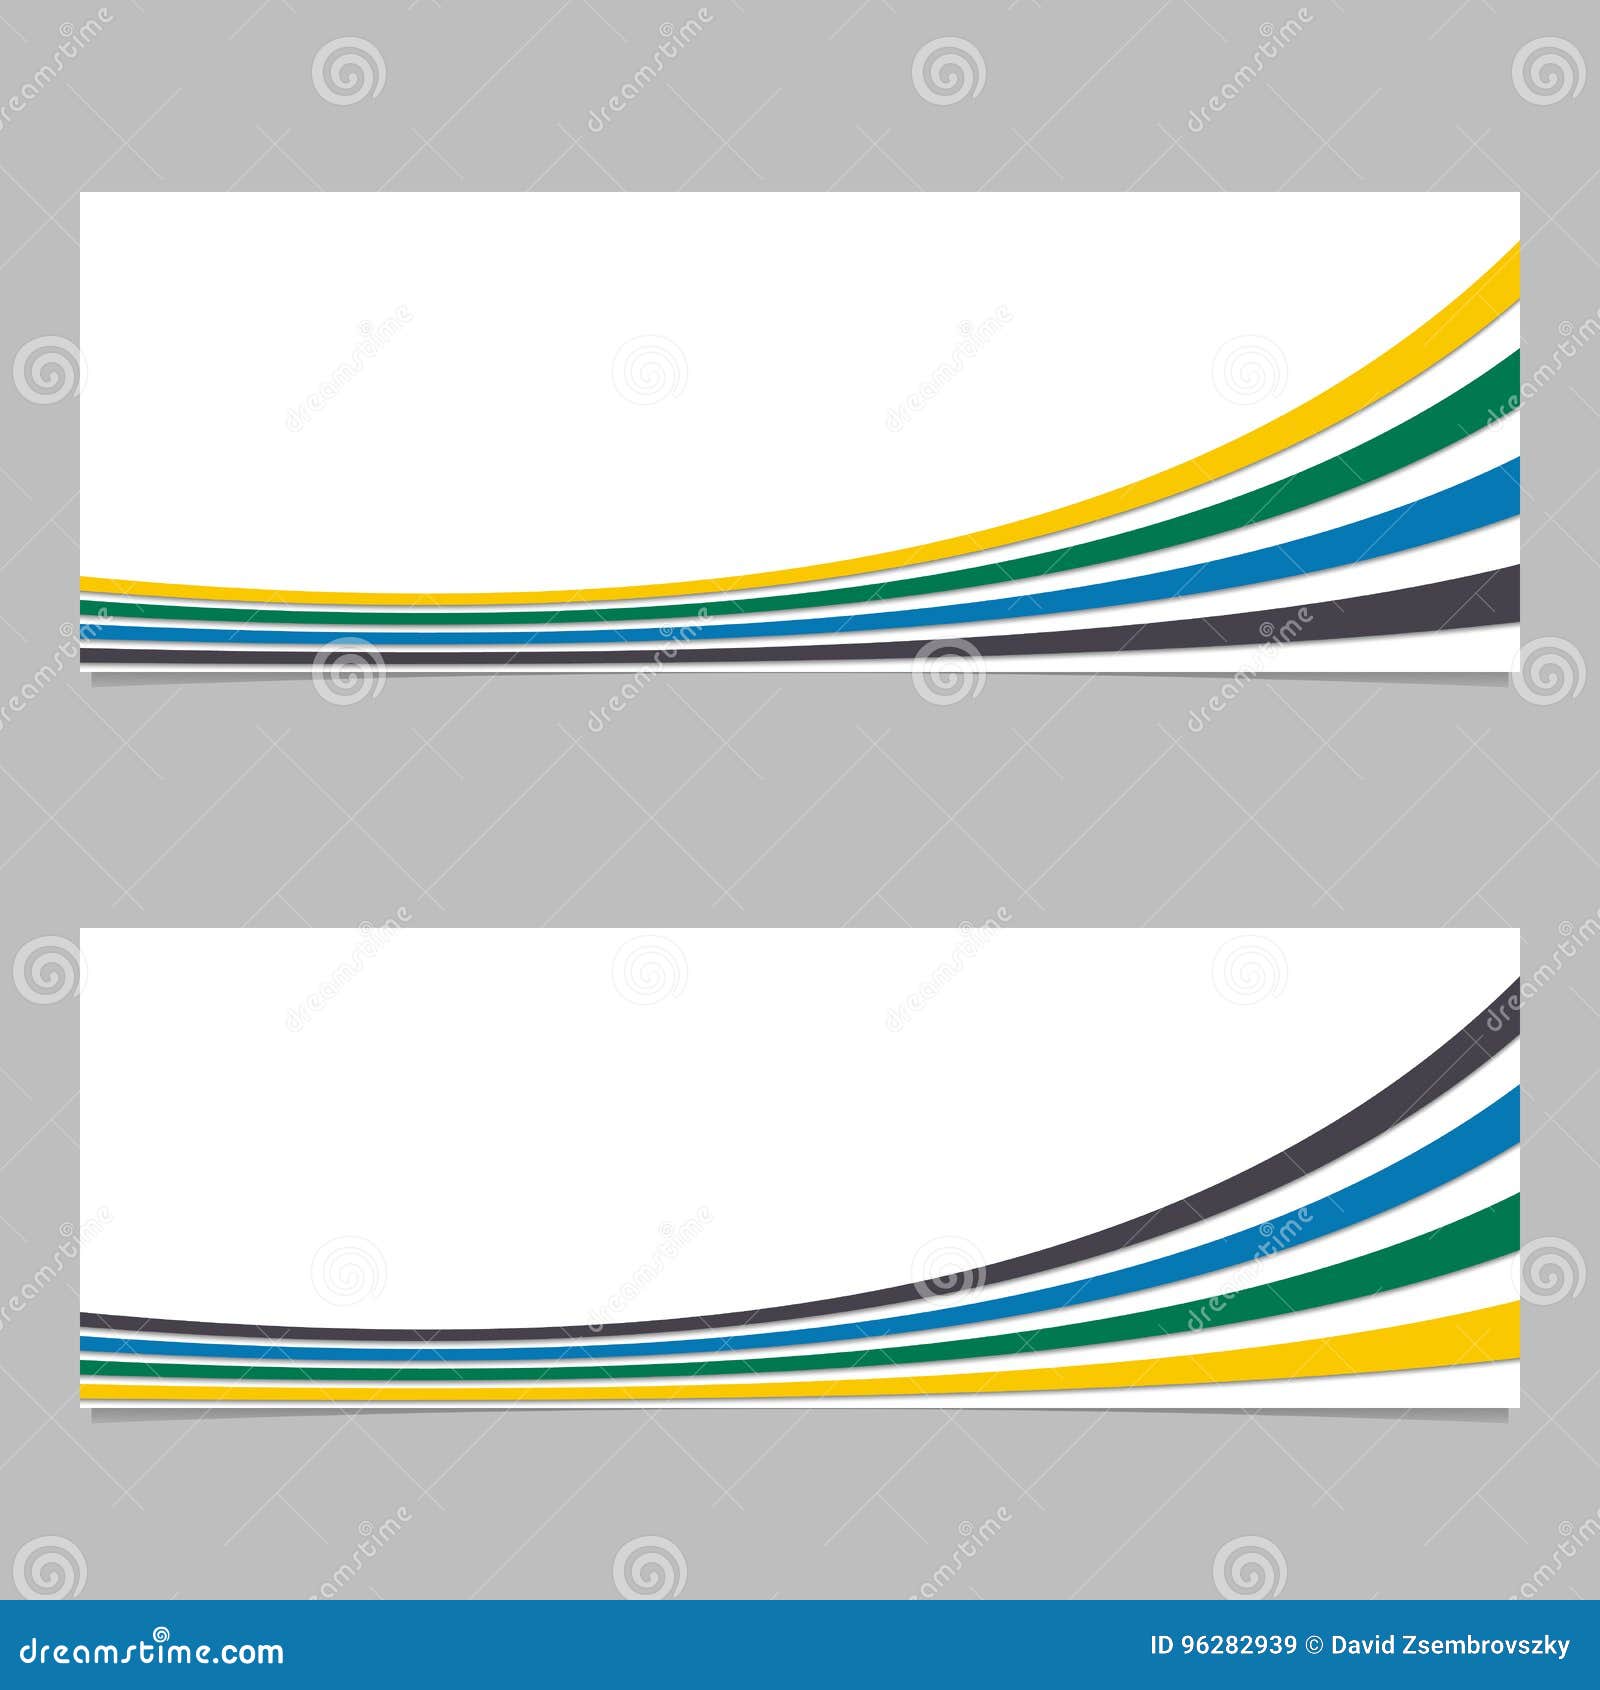 Banner Background From Curves Vector Graphic Design With 3d Effect Stock Vector Illustration Of Shadow Layer